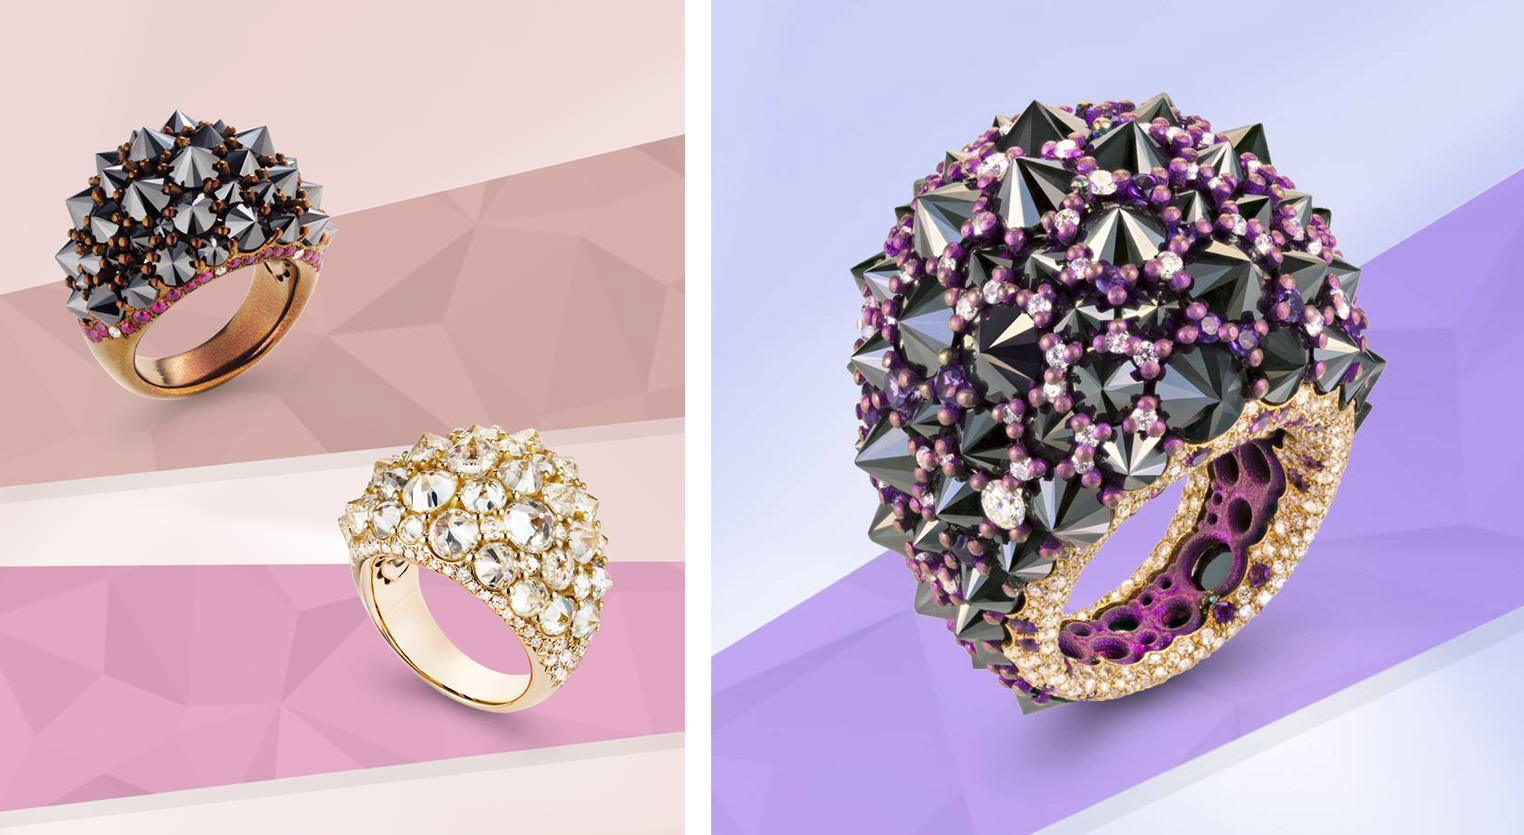 Mattioli ‘Rêve_r’ rings in titanium, with colourless and black diamonds, rubies, and rose gold with diamonds  